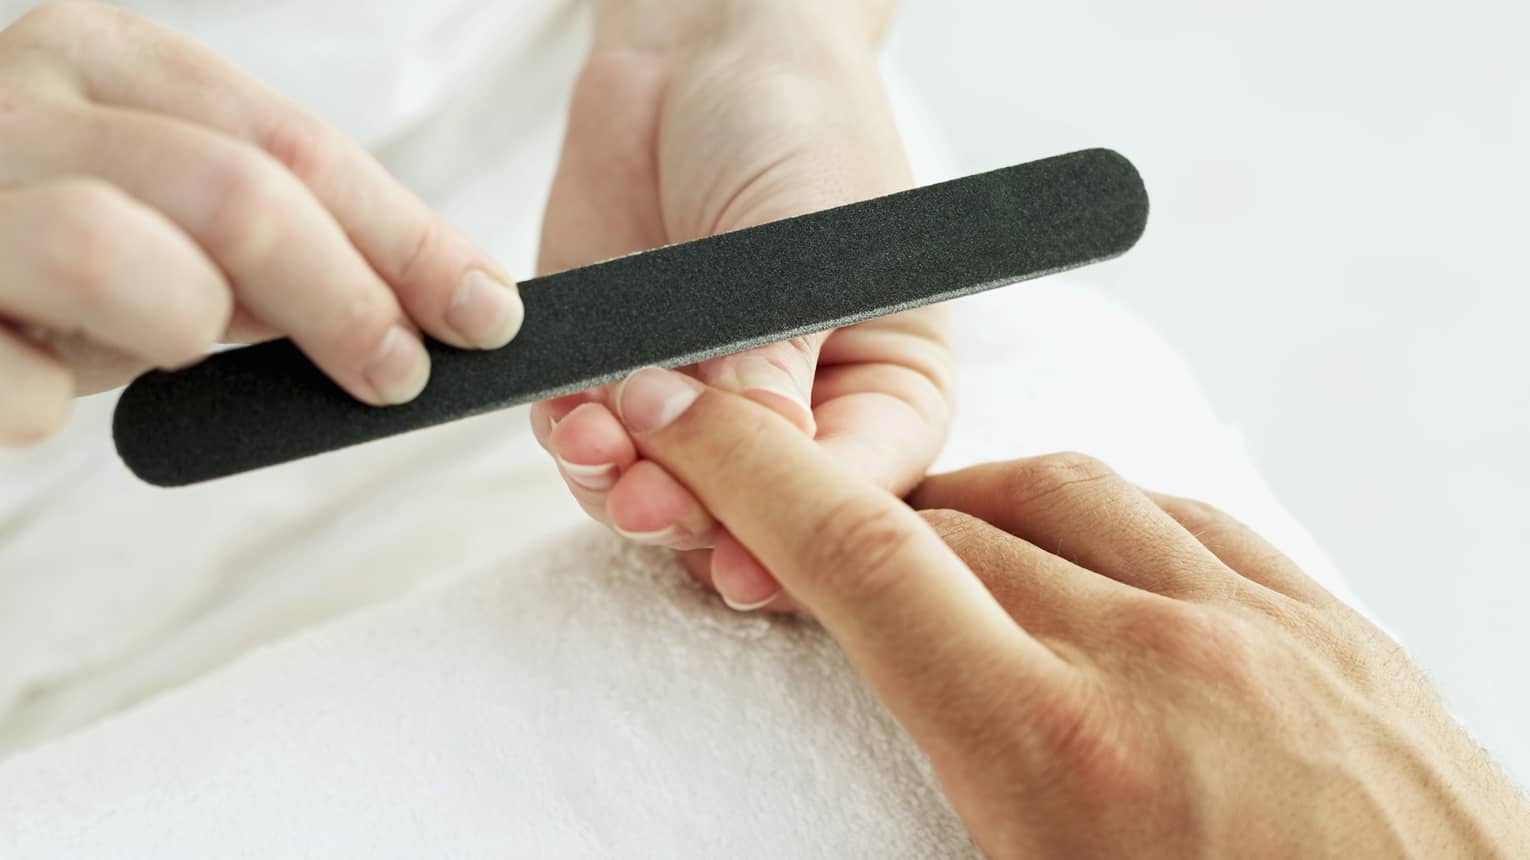 Woman holds manicure nail file to man's fingernails over white towel